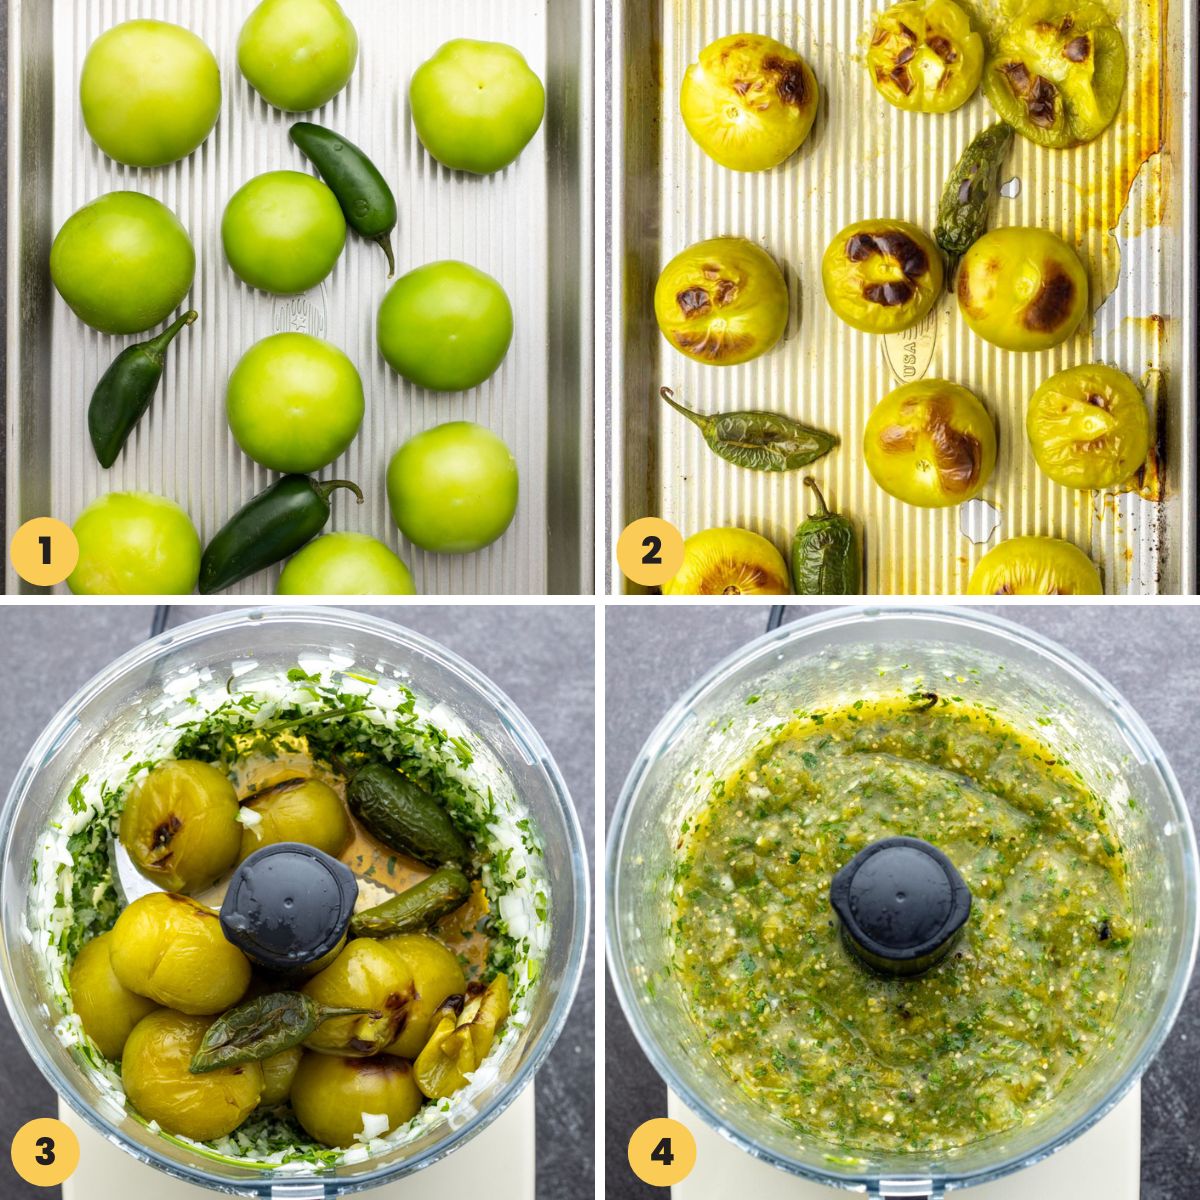 Collage of 4 images showing how to make salsa verde with fresh tomatillos by roasting and then blending in a food processor